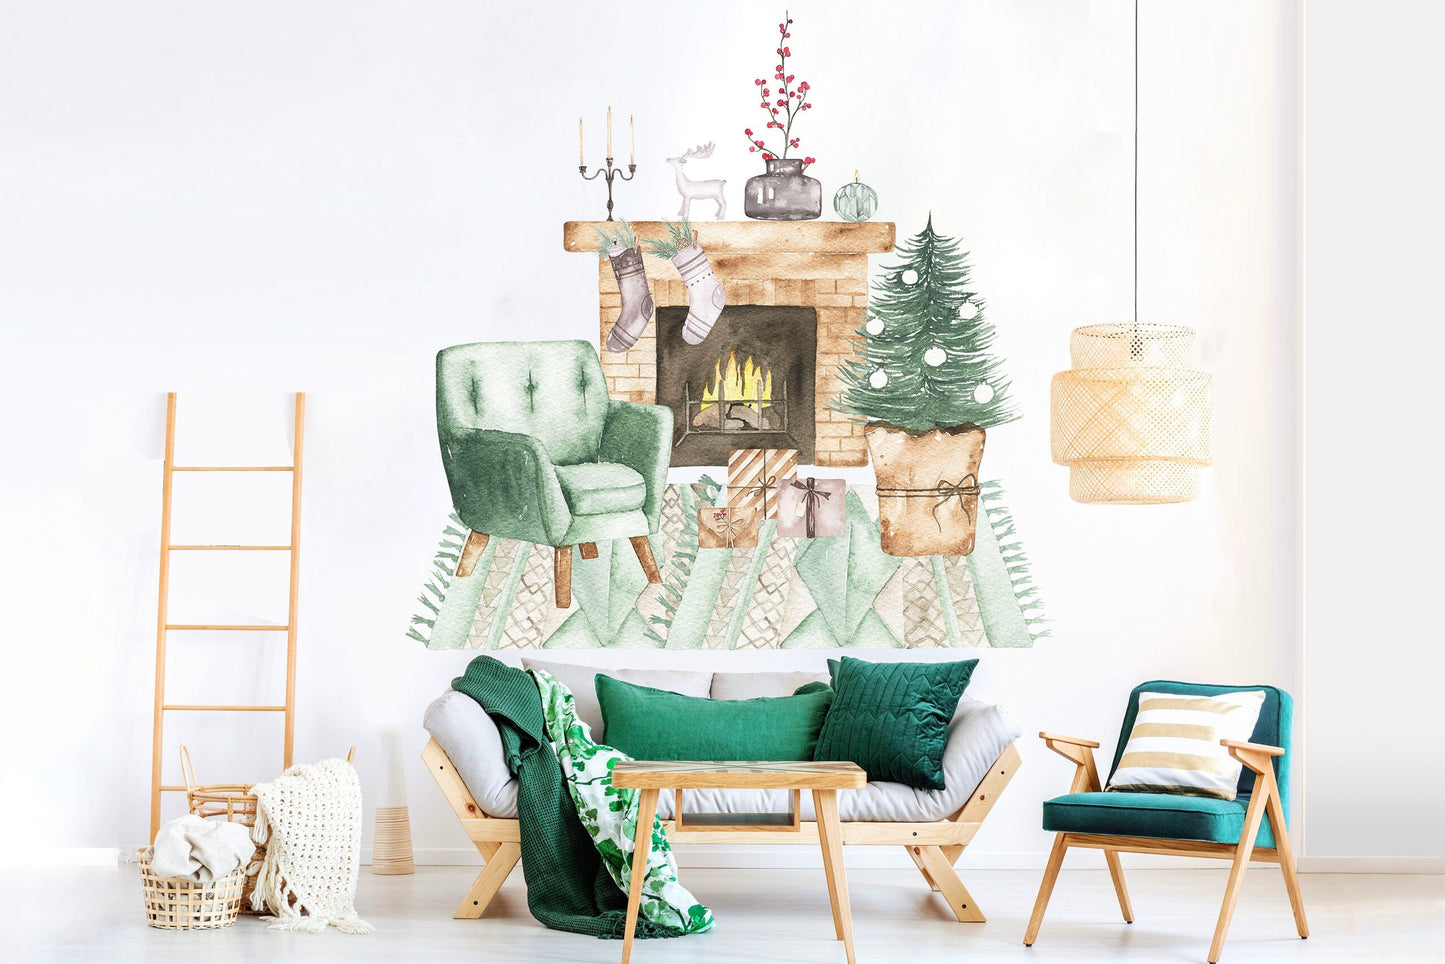 Christmas Scene Fireplace and Tables with Chairs Wall Decal - BR047